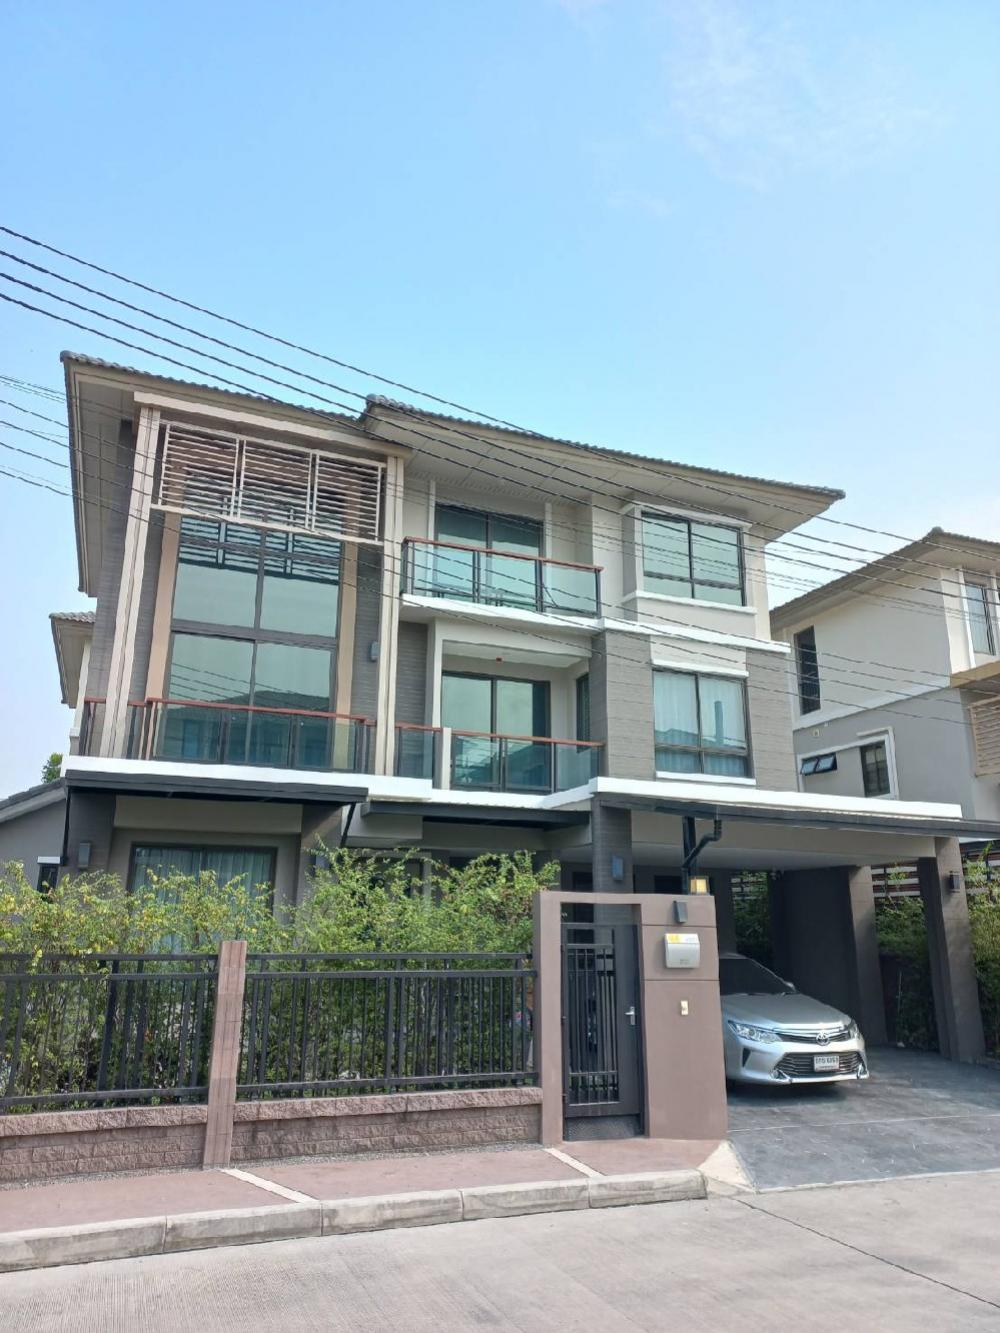 For SaleHouseVipawadee, Don Mueang, Lak Si : House for sale, Passorn Songprapa, Don Mueang, 3 floors, 4 bedrooms, 5 bathrooms, 260 sq m. 58.2 sq w. Decorated and ready to move in, very good location.